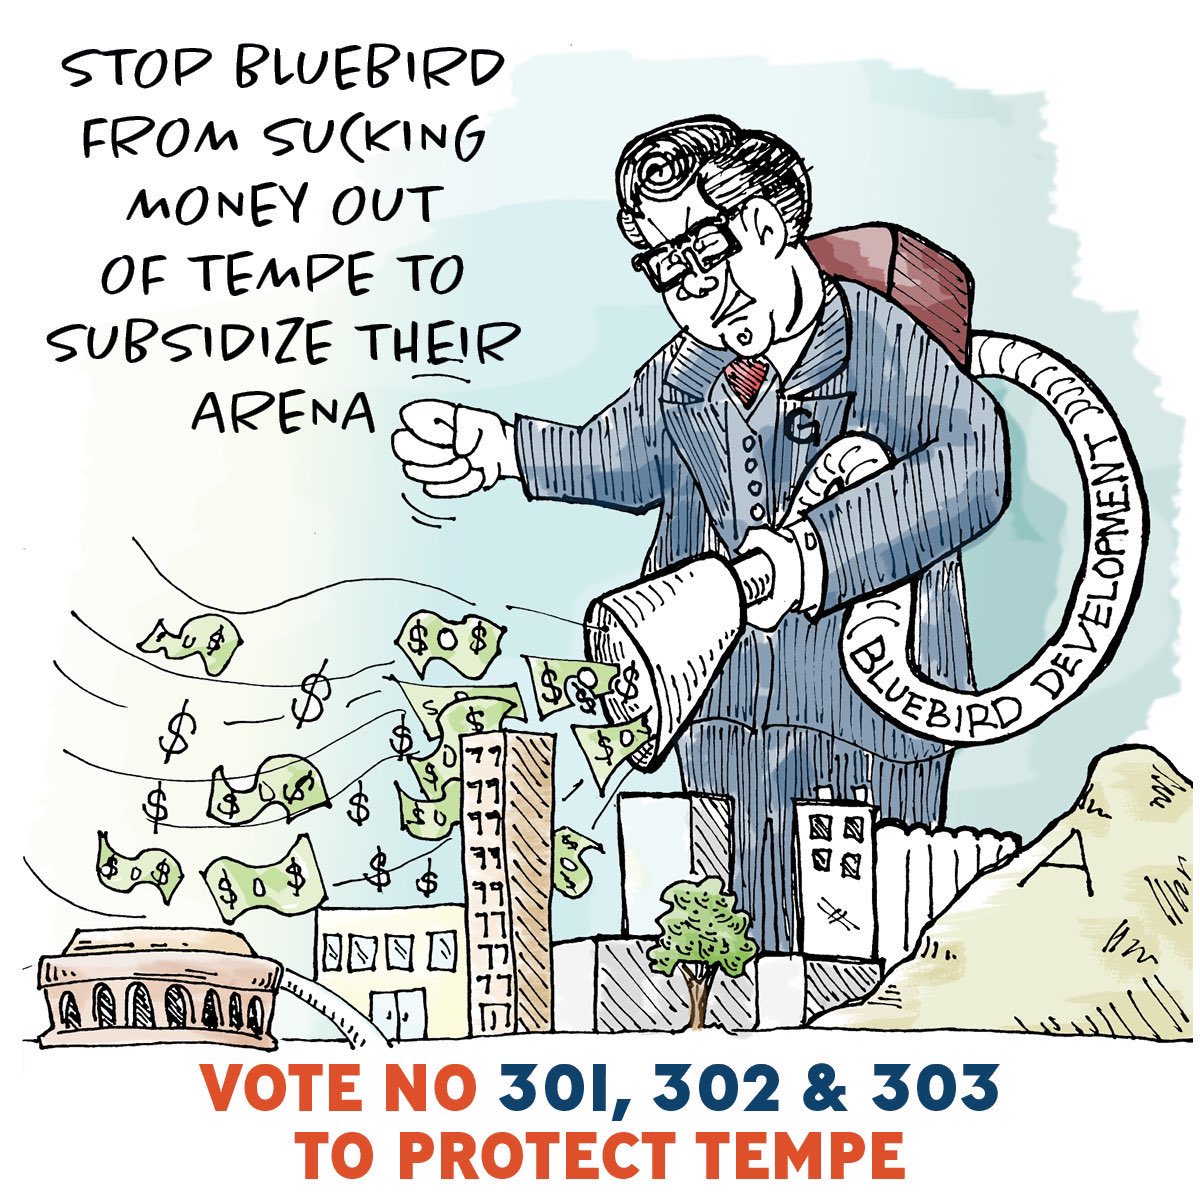 A losing prospect from a losing team. Drop off ballots today thru May 16 to #voteno